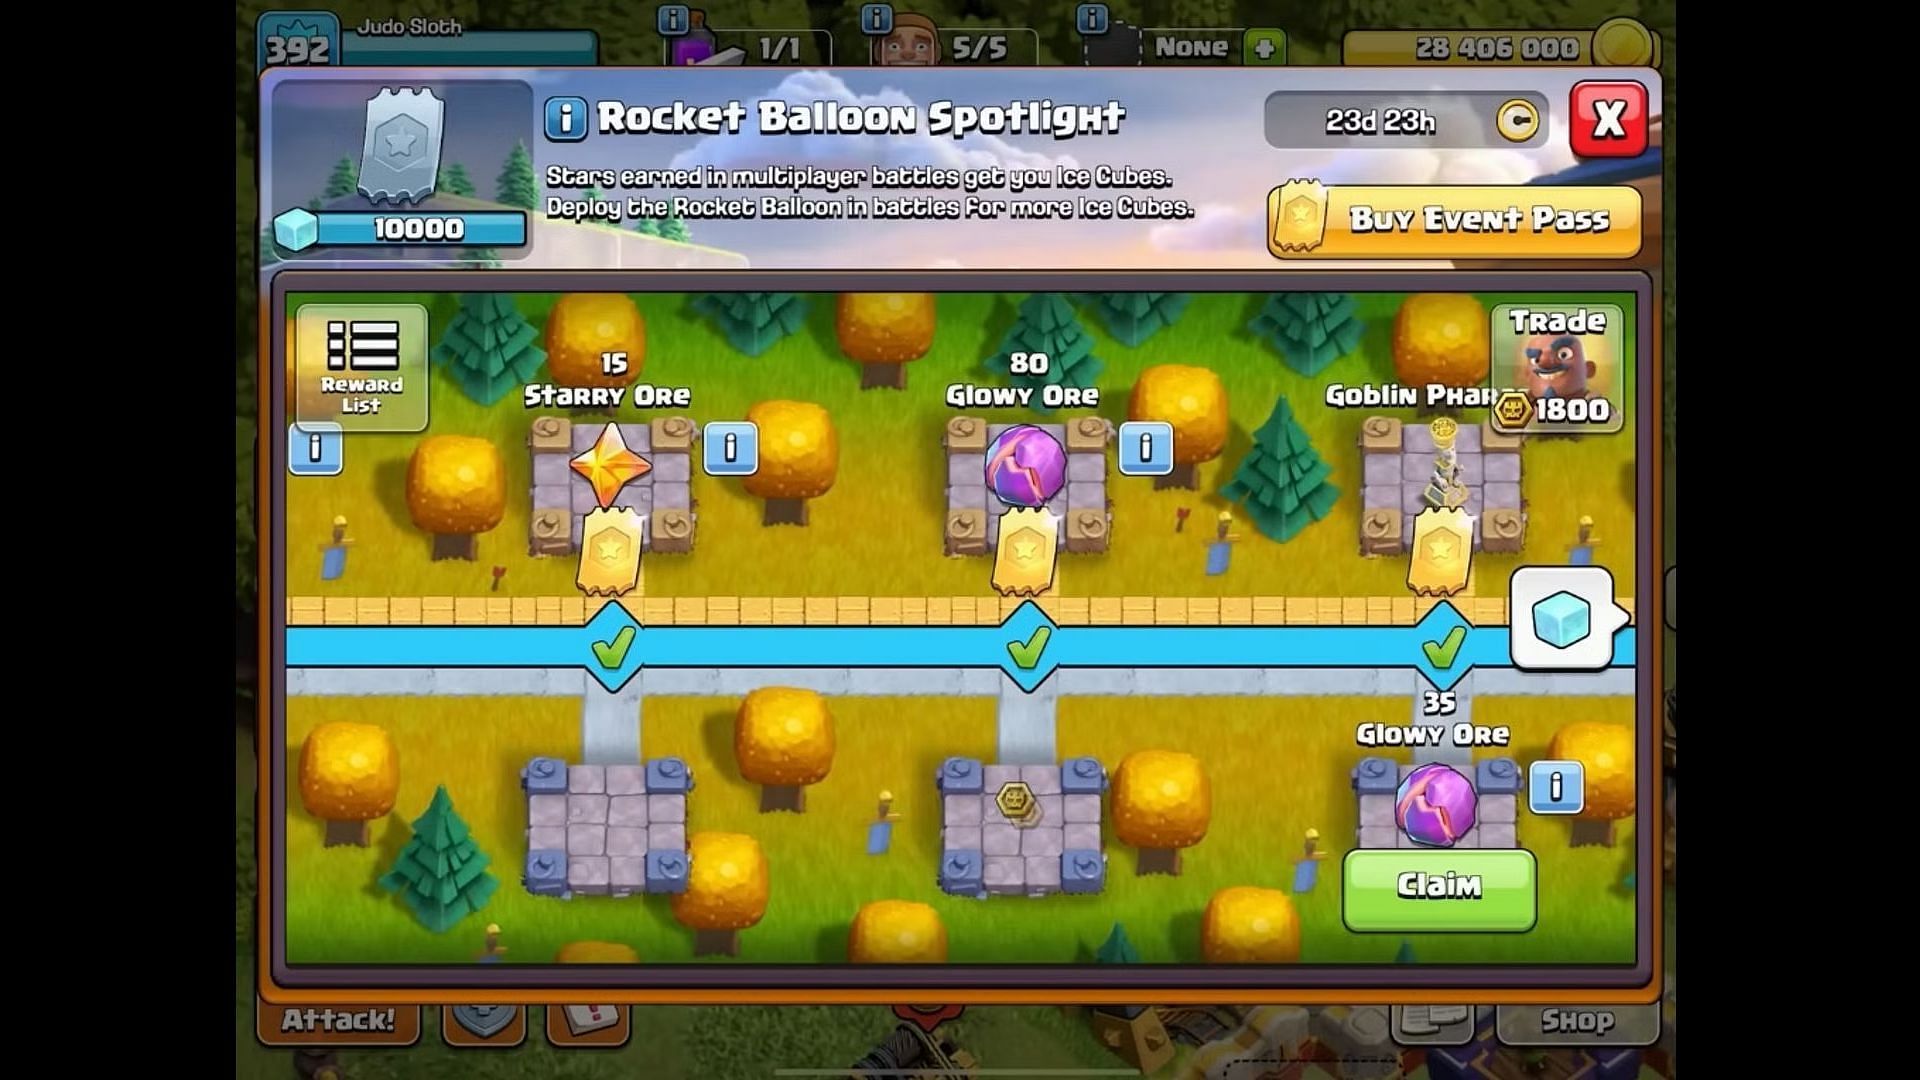 Here is a partial snap of the progression path of the Rocket Balloon Spotlight event (Image via Supercell)